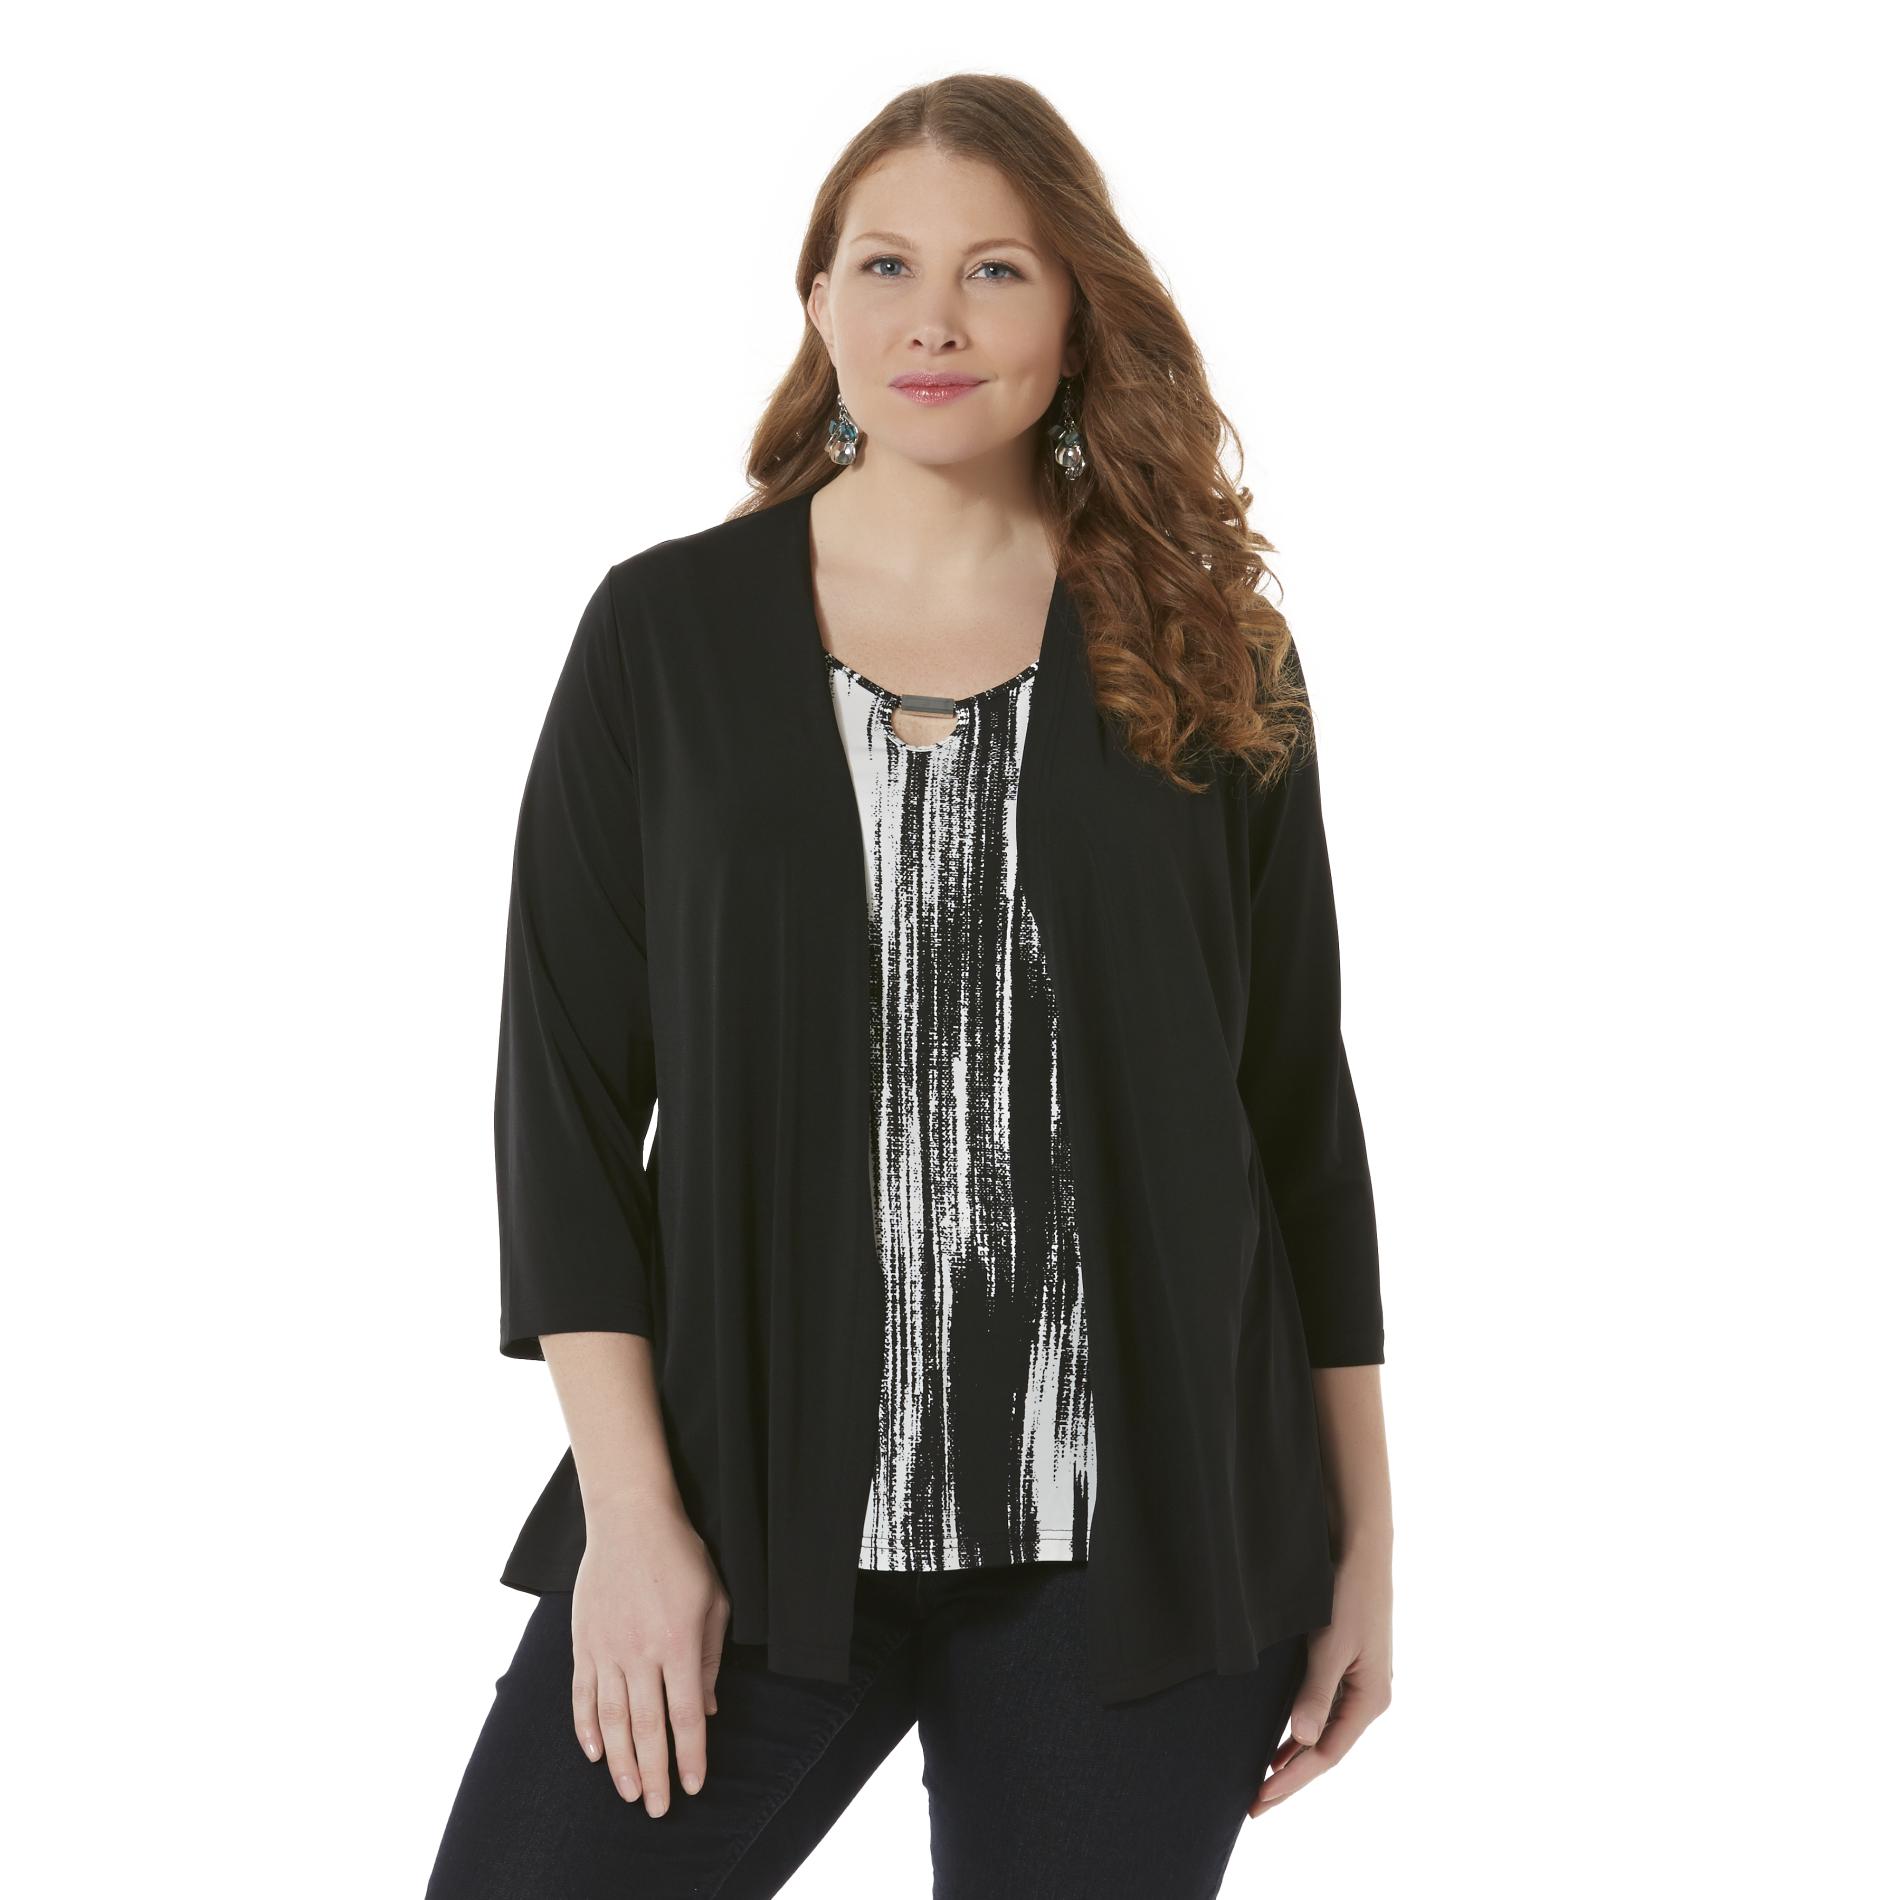 Women's Plus Layered-Look Top - Abstract Print